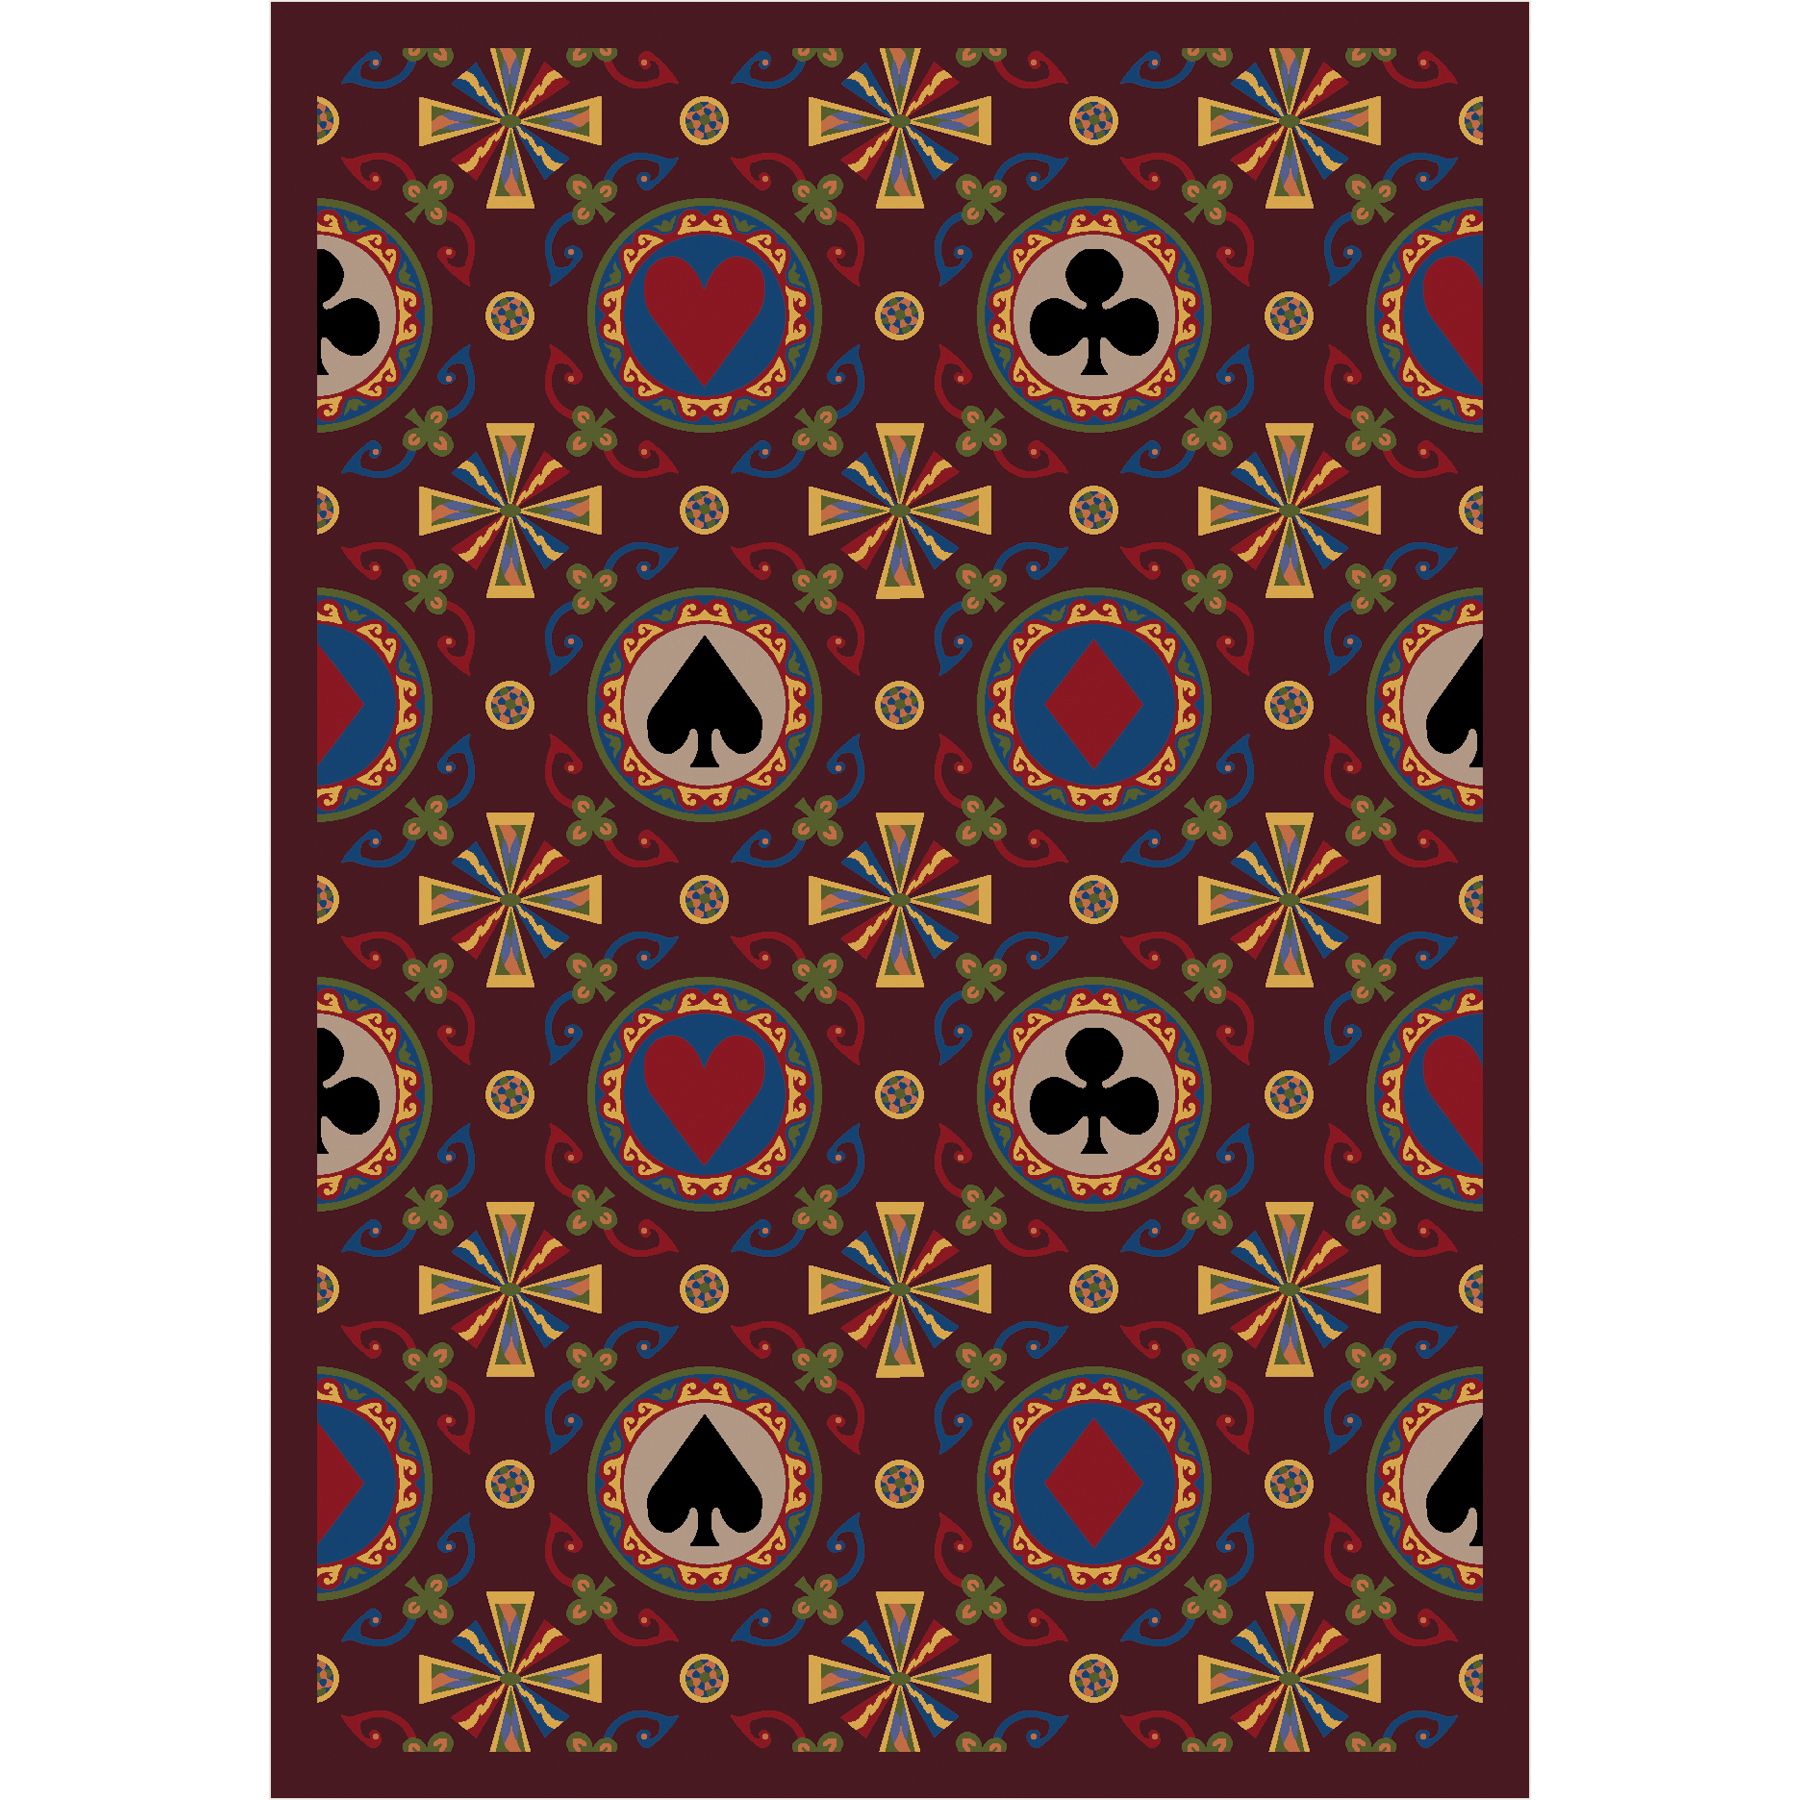 Joy Carpets Stacked Deck 5'4" x 7'8" Area Rug